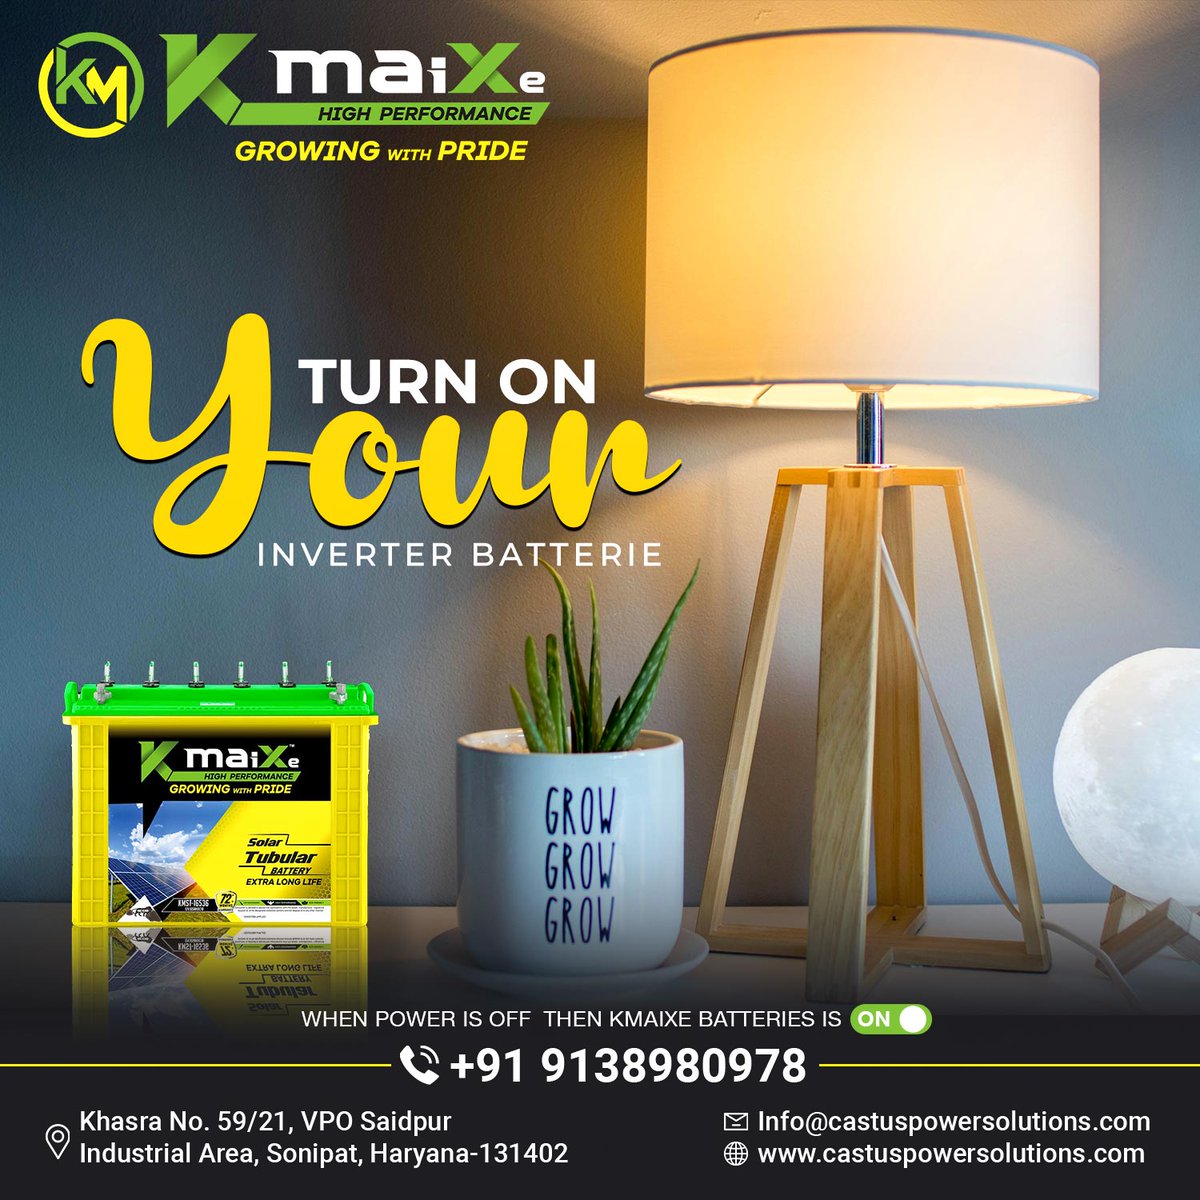 #KmaiXe #Appliances #HomeAppliances #Home #Electronics #Appliance #HomeAppliance #Technology #OnlineShopping #UPSBatteries #Massimo #Electrical #Household #India #Product #electricalappliances